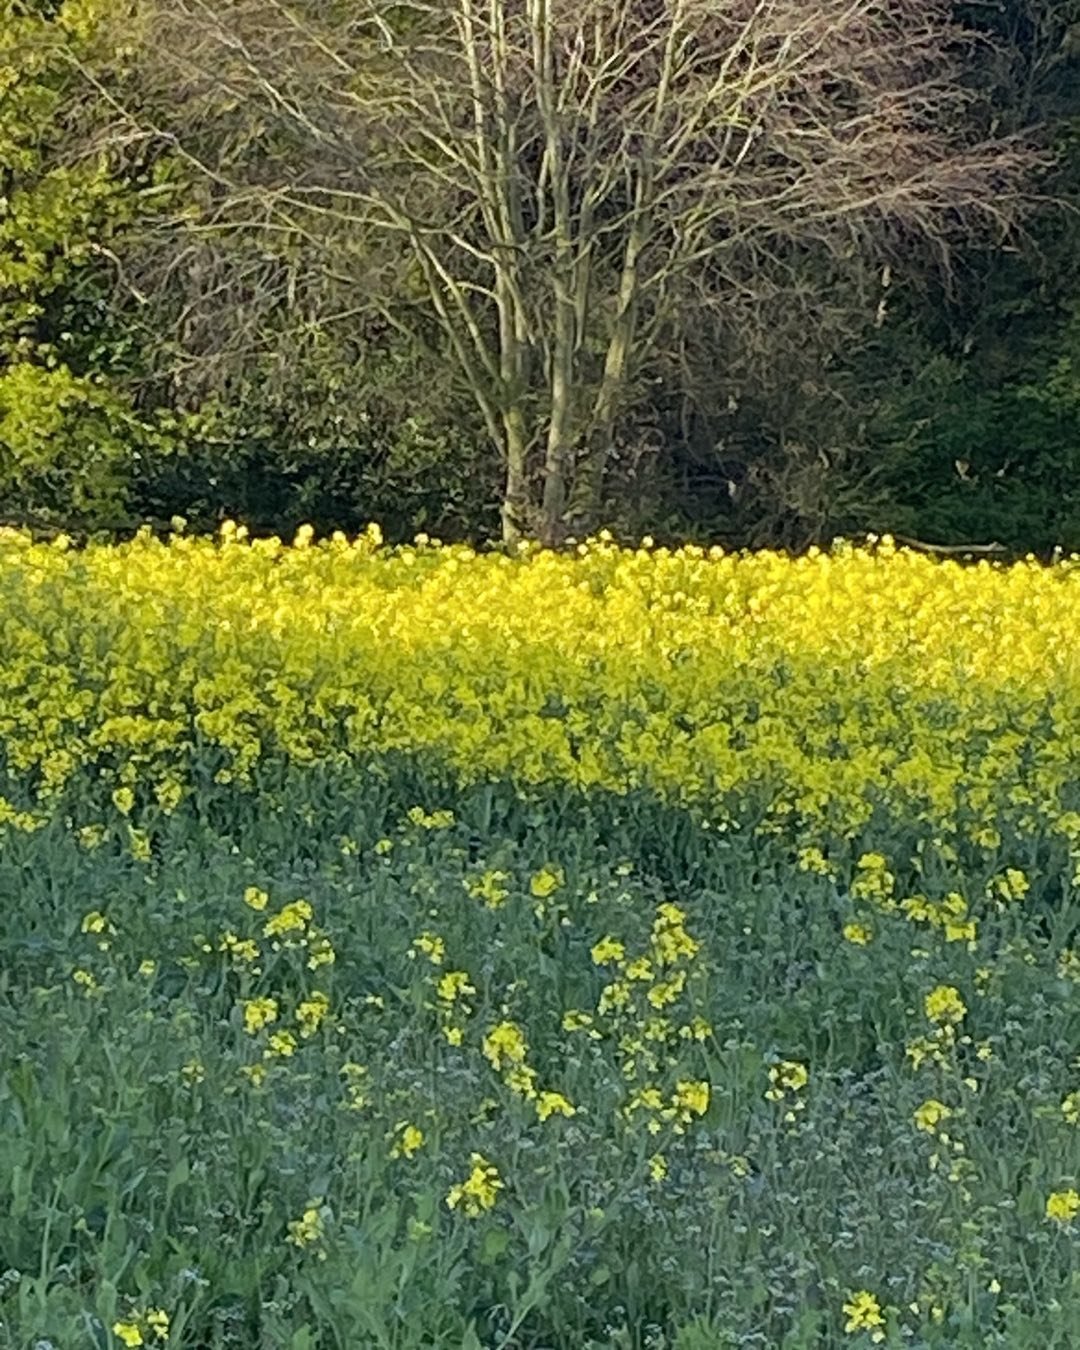 Rapeseed
Ripon
North Yorkshire

How inspirational is this Rapeseed. Nutritious and beautiful. A herald of Spring. There is yet to be a paint named rapeseed yellow!

#rapeseedfields #rapeseedfield #rapeseedoil #rapeseedwaxcandle #rapeseedcandles #yell